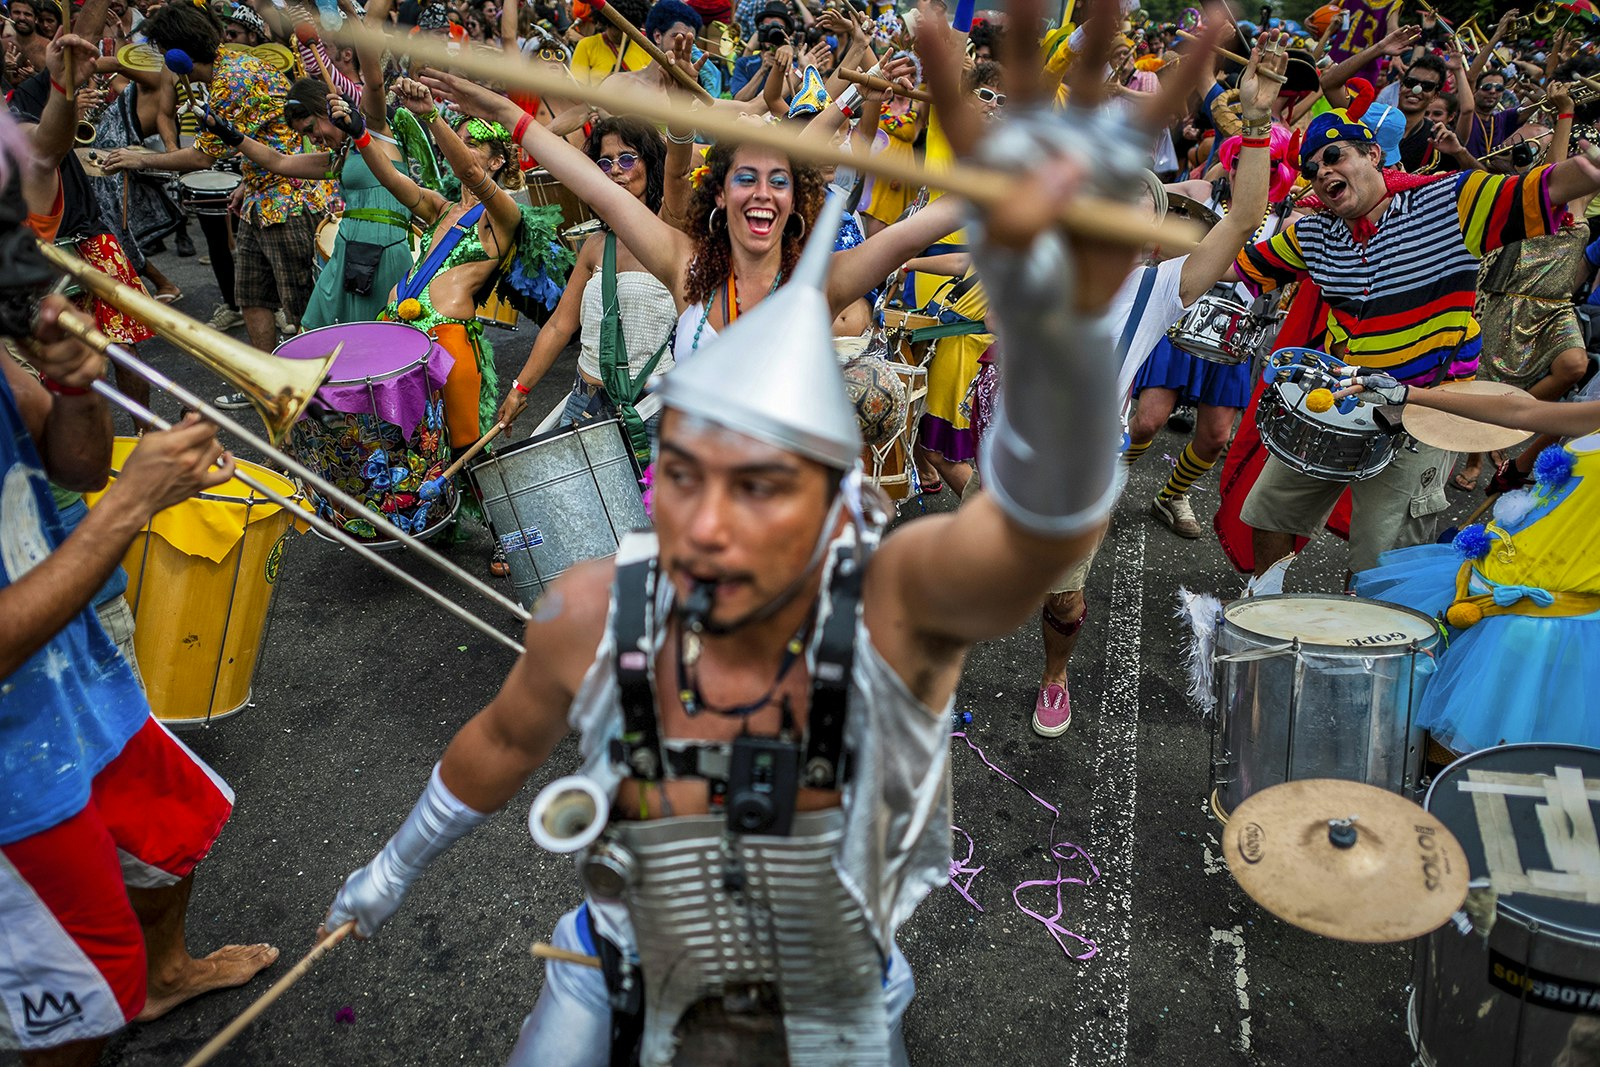 A man in a Tin Man outfit leads a group of partiers through the streets of Rio during Carnival